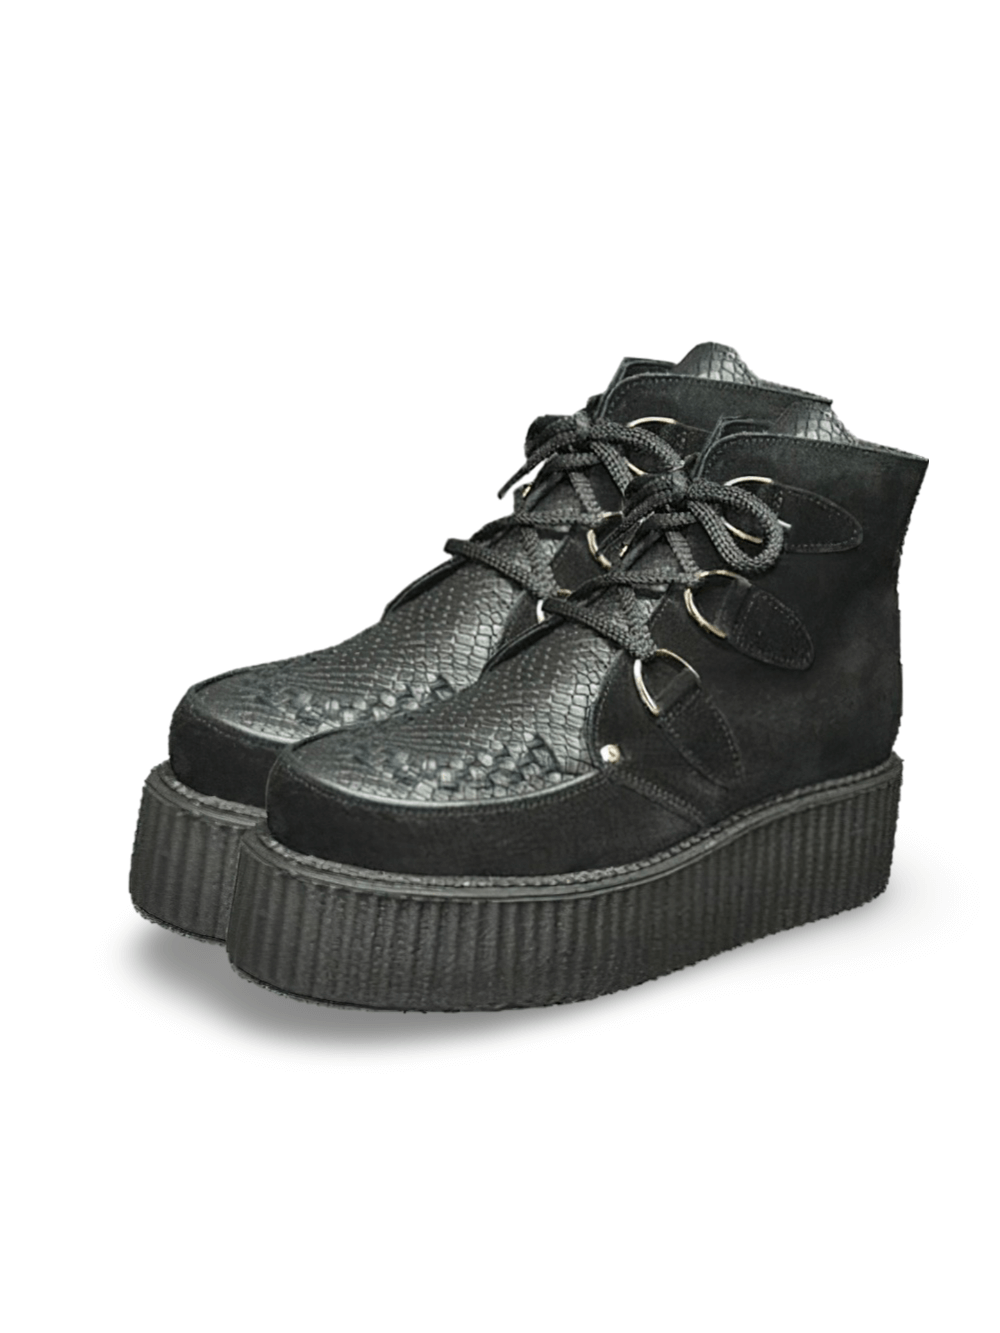 Stylish Black Suede And Snake Leather Creepers